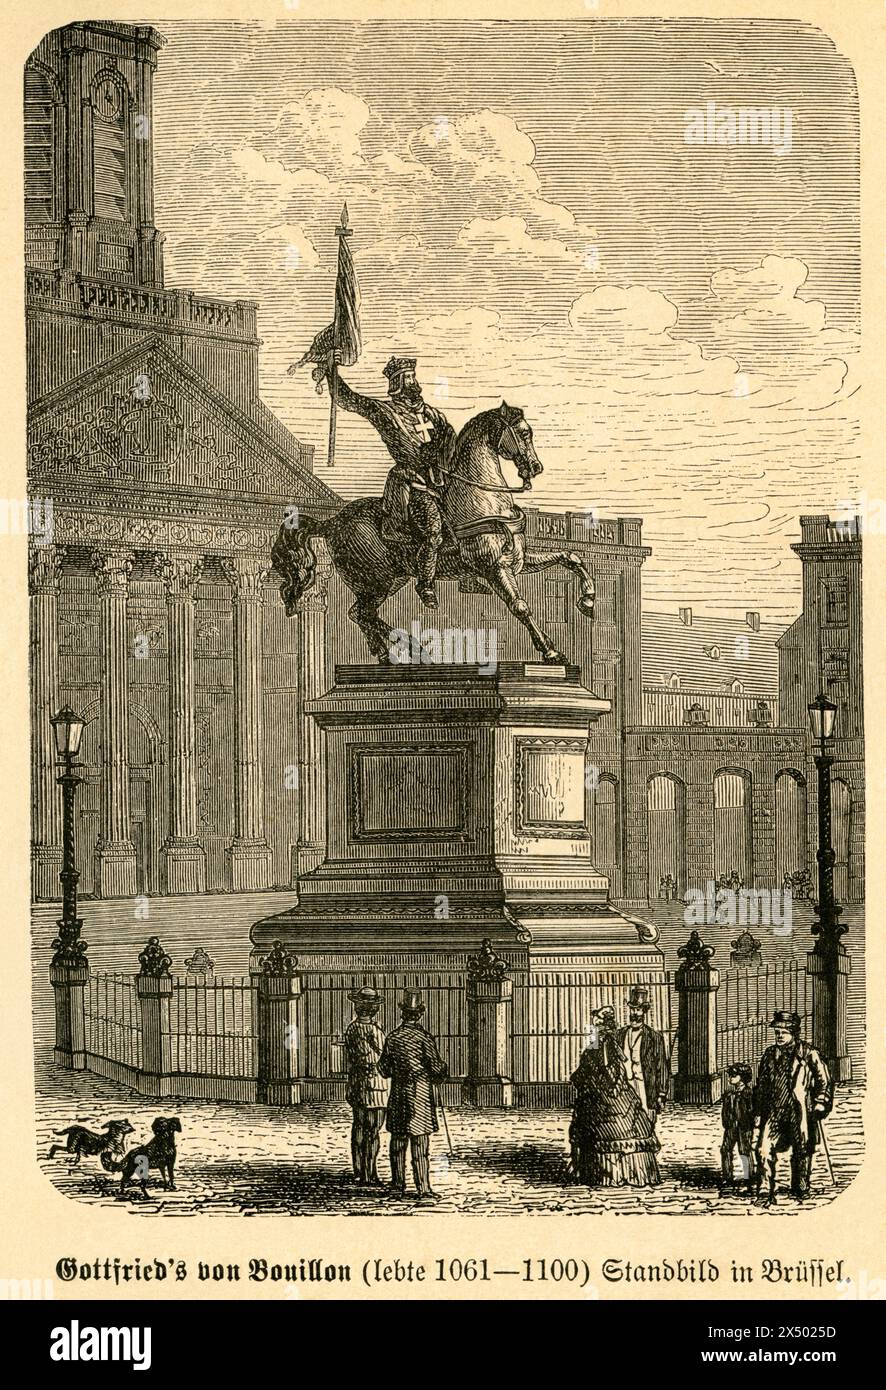 horseman statue of Godfrey of Bouillon, ARTIST'S COPYRIGHT HAS NOT TO BE CLEARED Stock Photo